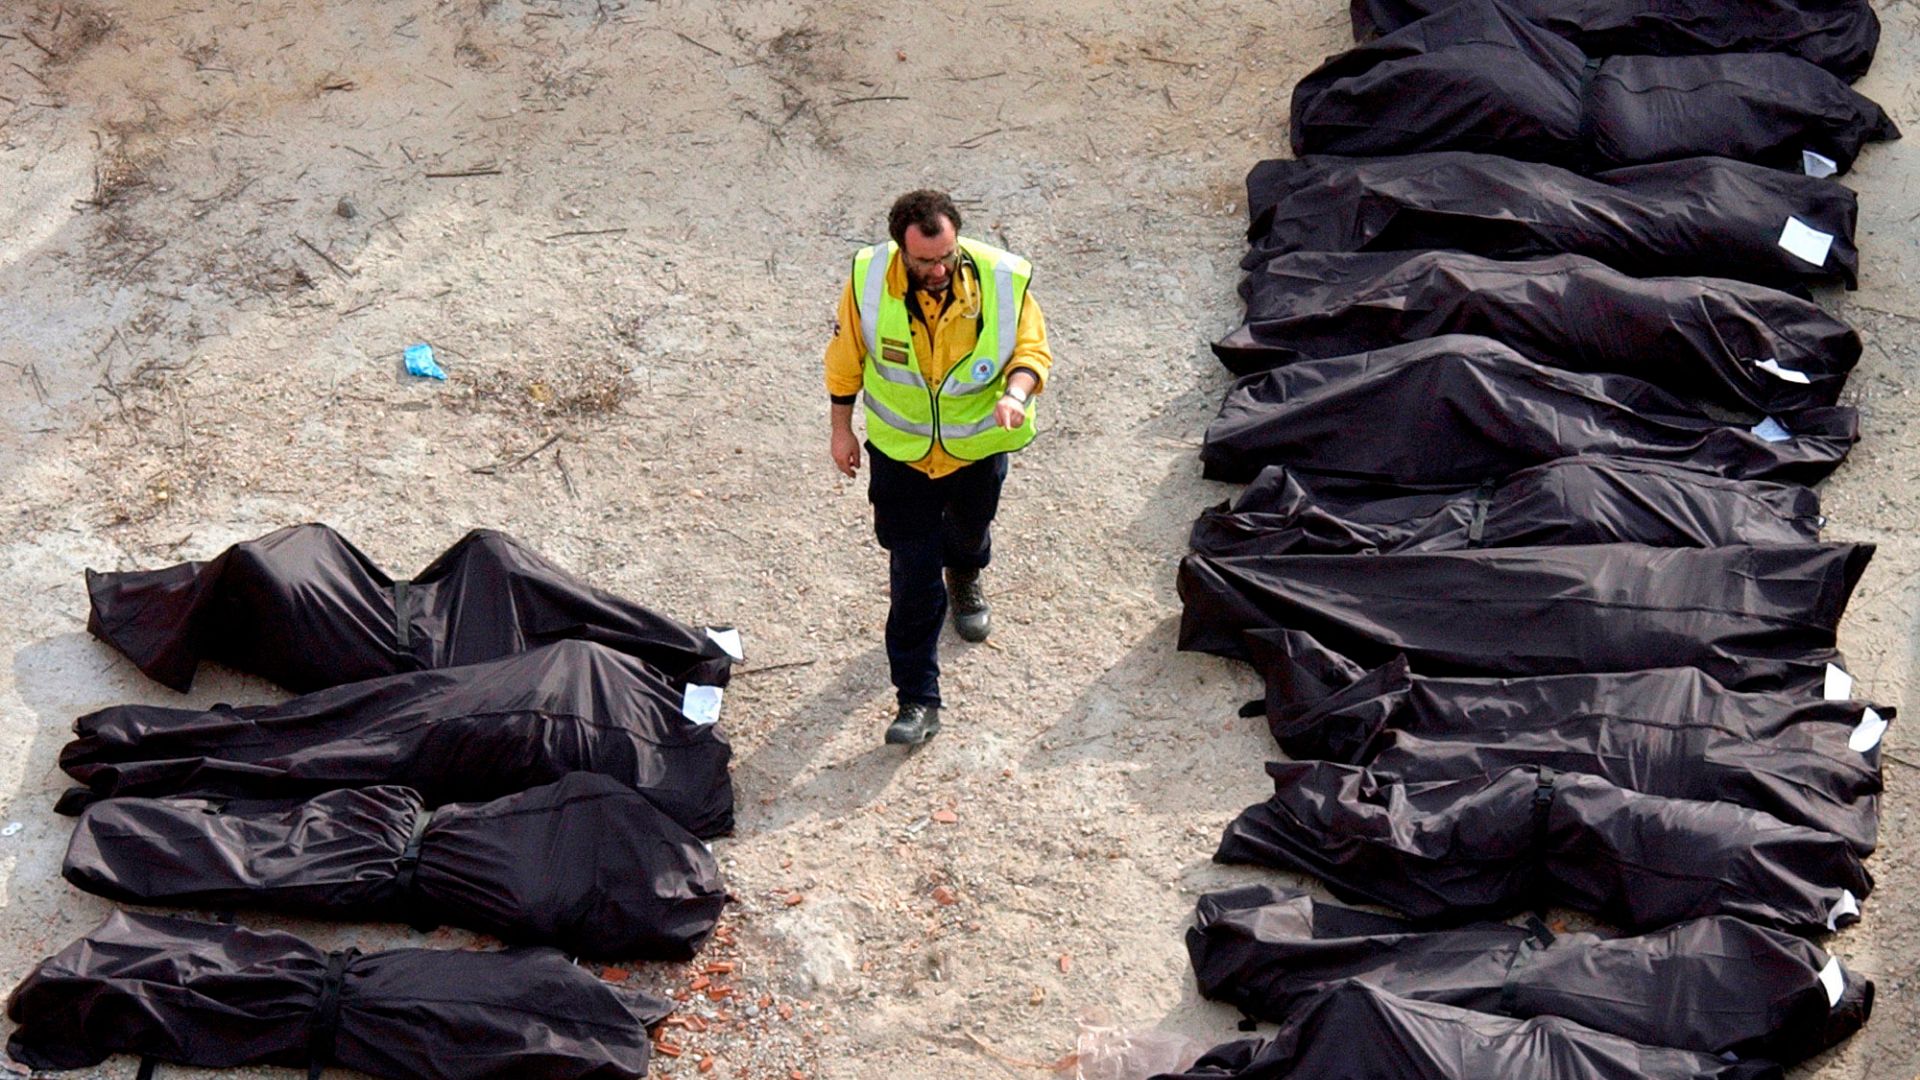  ** FILE ** A Spanish rescue worker counts the bodies removed from one of the commuter trains following a number of explosions on trains in Madrid in this March 11, 2004, file photo. The first four of 28 defendants in the 2004 Madrid train bombings were found guilty of murder and other charges Wednesday, Oct. 31, 2007, in the culmination of a politically divisive trial over Europe's worst Islamic terror attack. The backpack bomb attacks killed 191 people and wounded more than 1,800. (AP Photo/Peter DeJong)